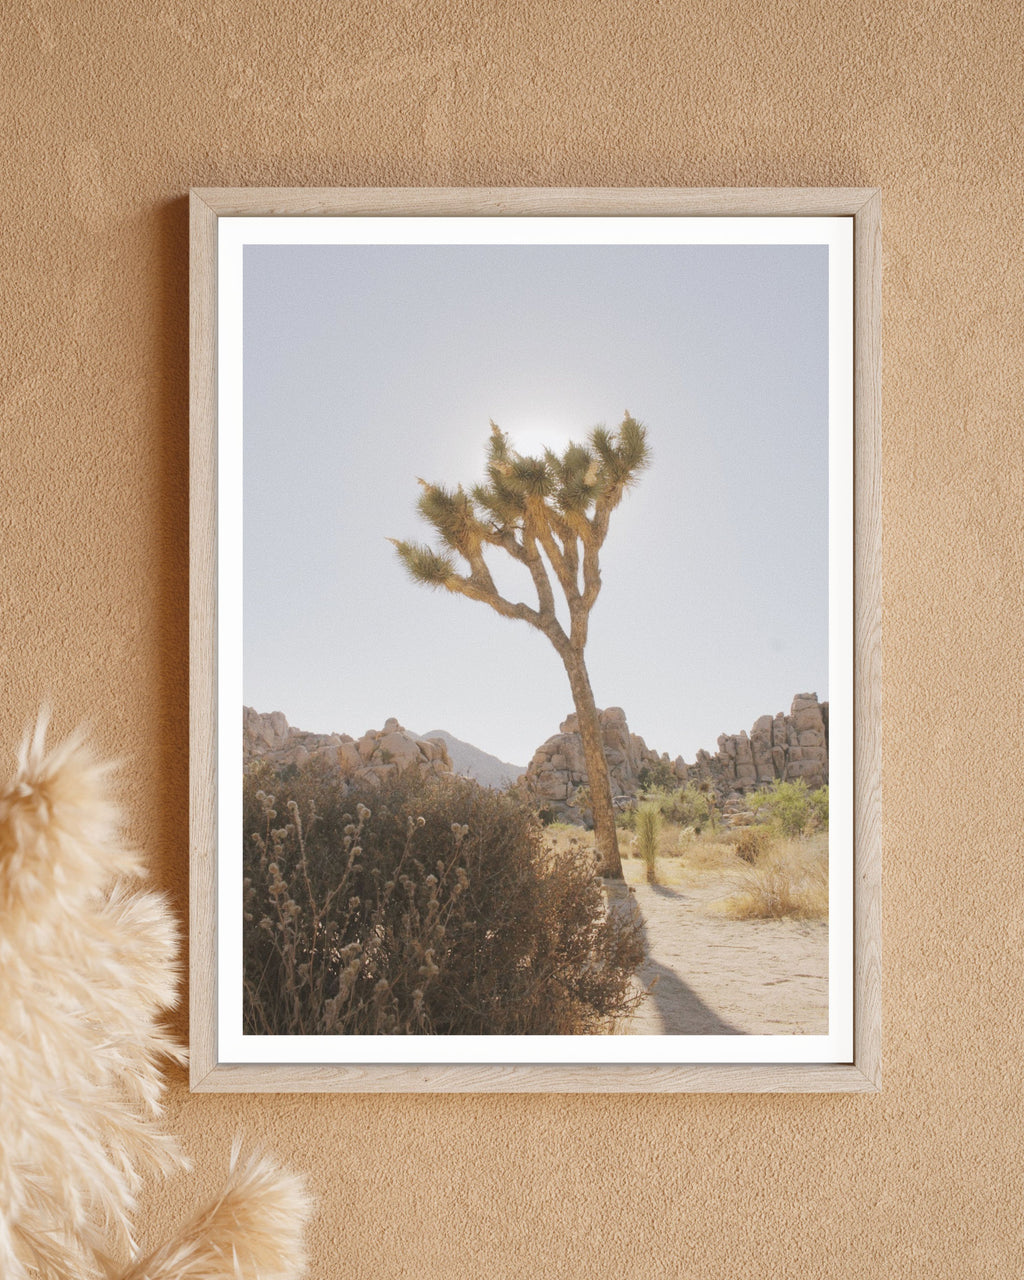 "Afternoon in Joshua Tree" Matte Poster Prints